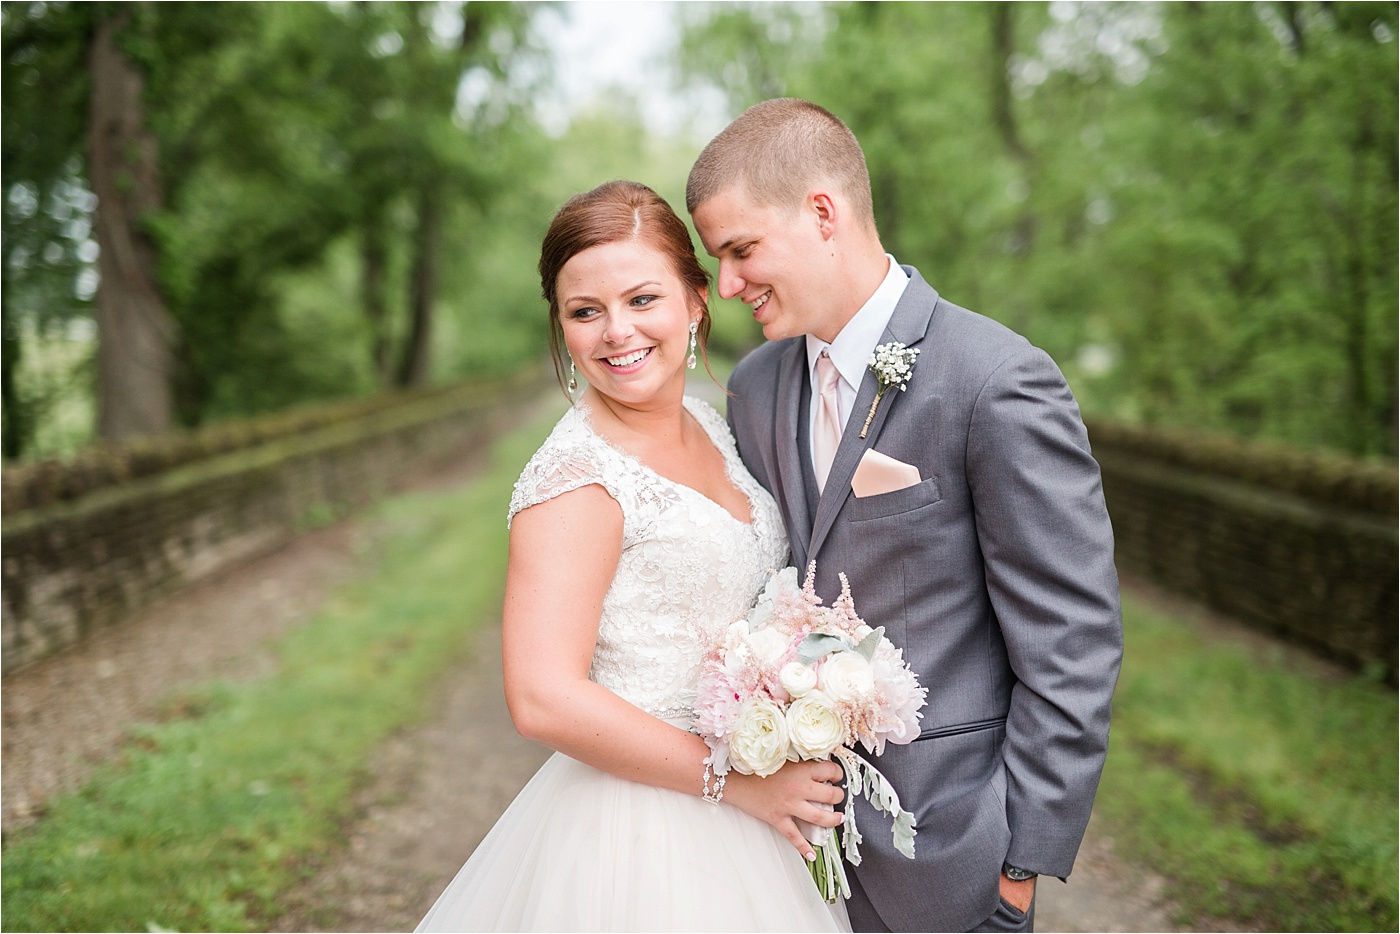 A Blush Outdoor wedding at Irongate Equestrian | KariMe Photography_0112